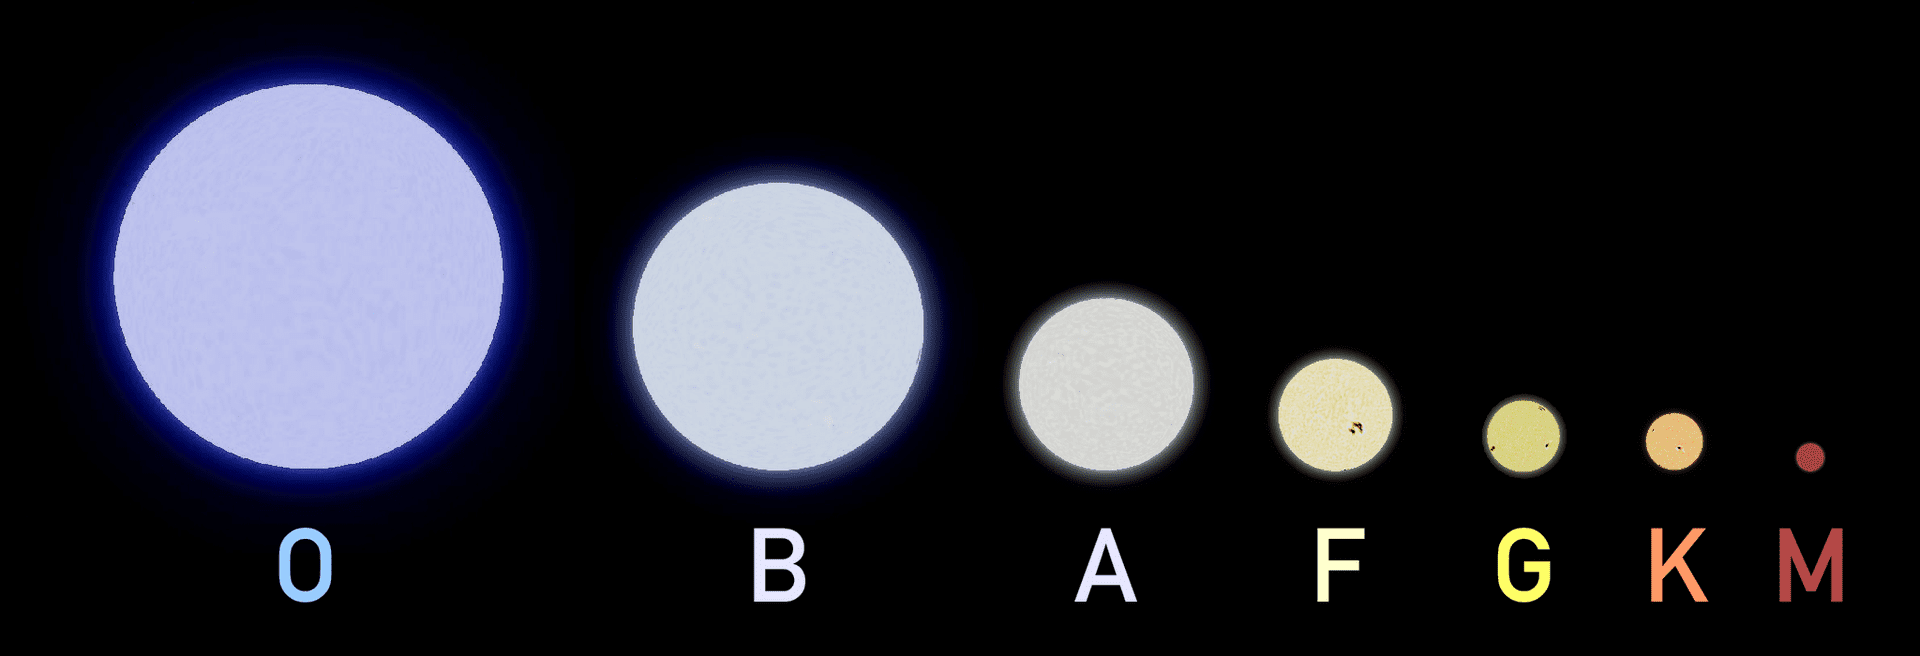 Understanding Stars: Types, Formation, and Characteristics